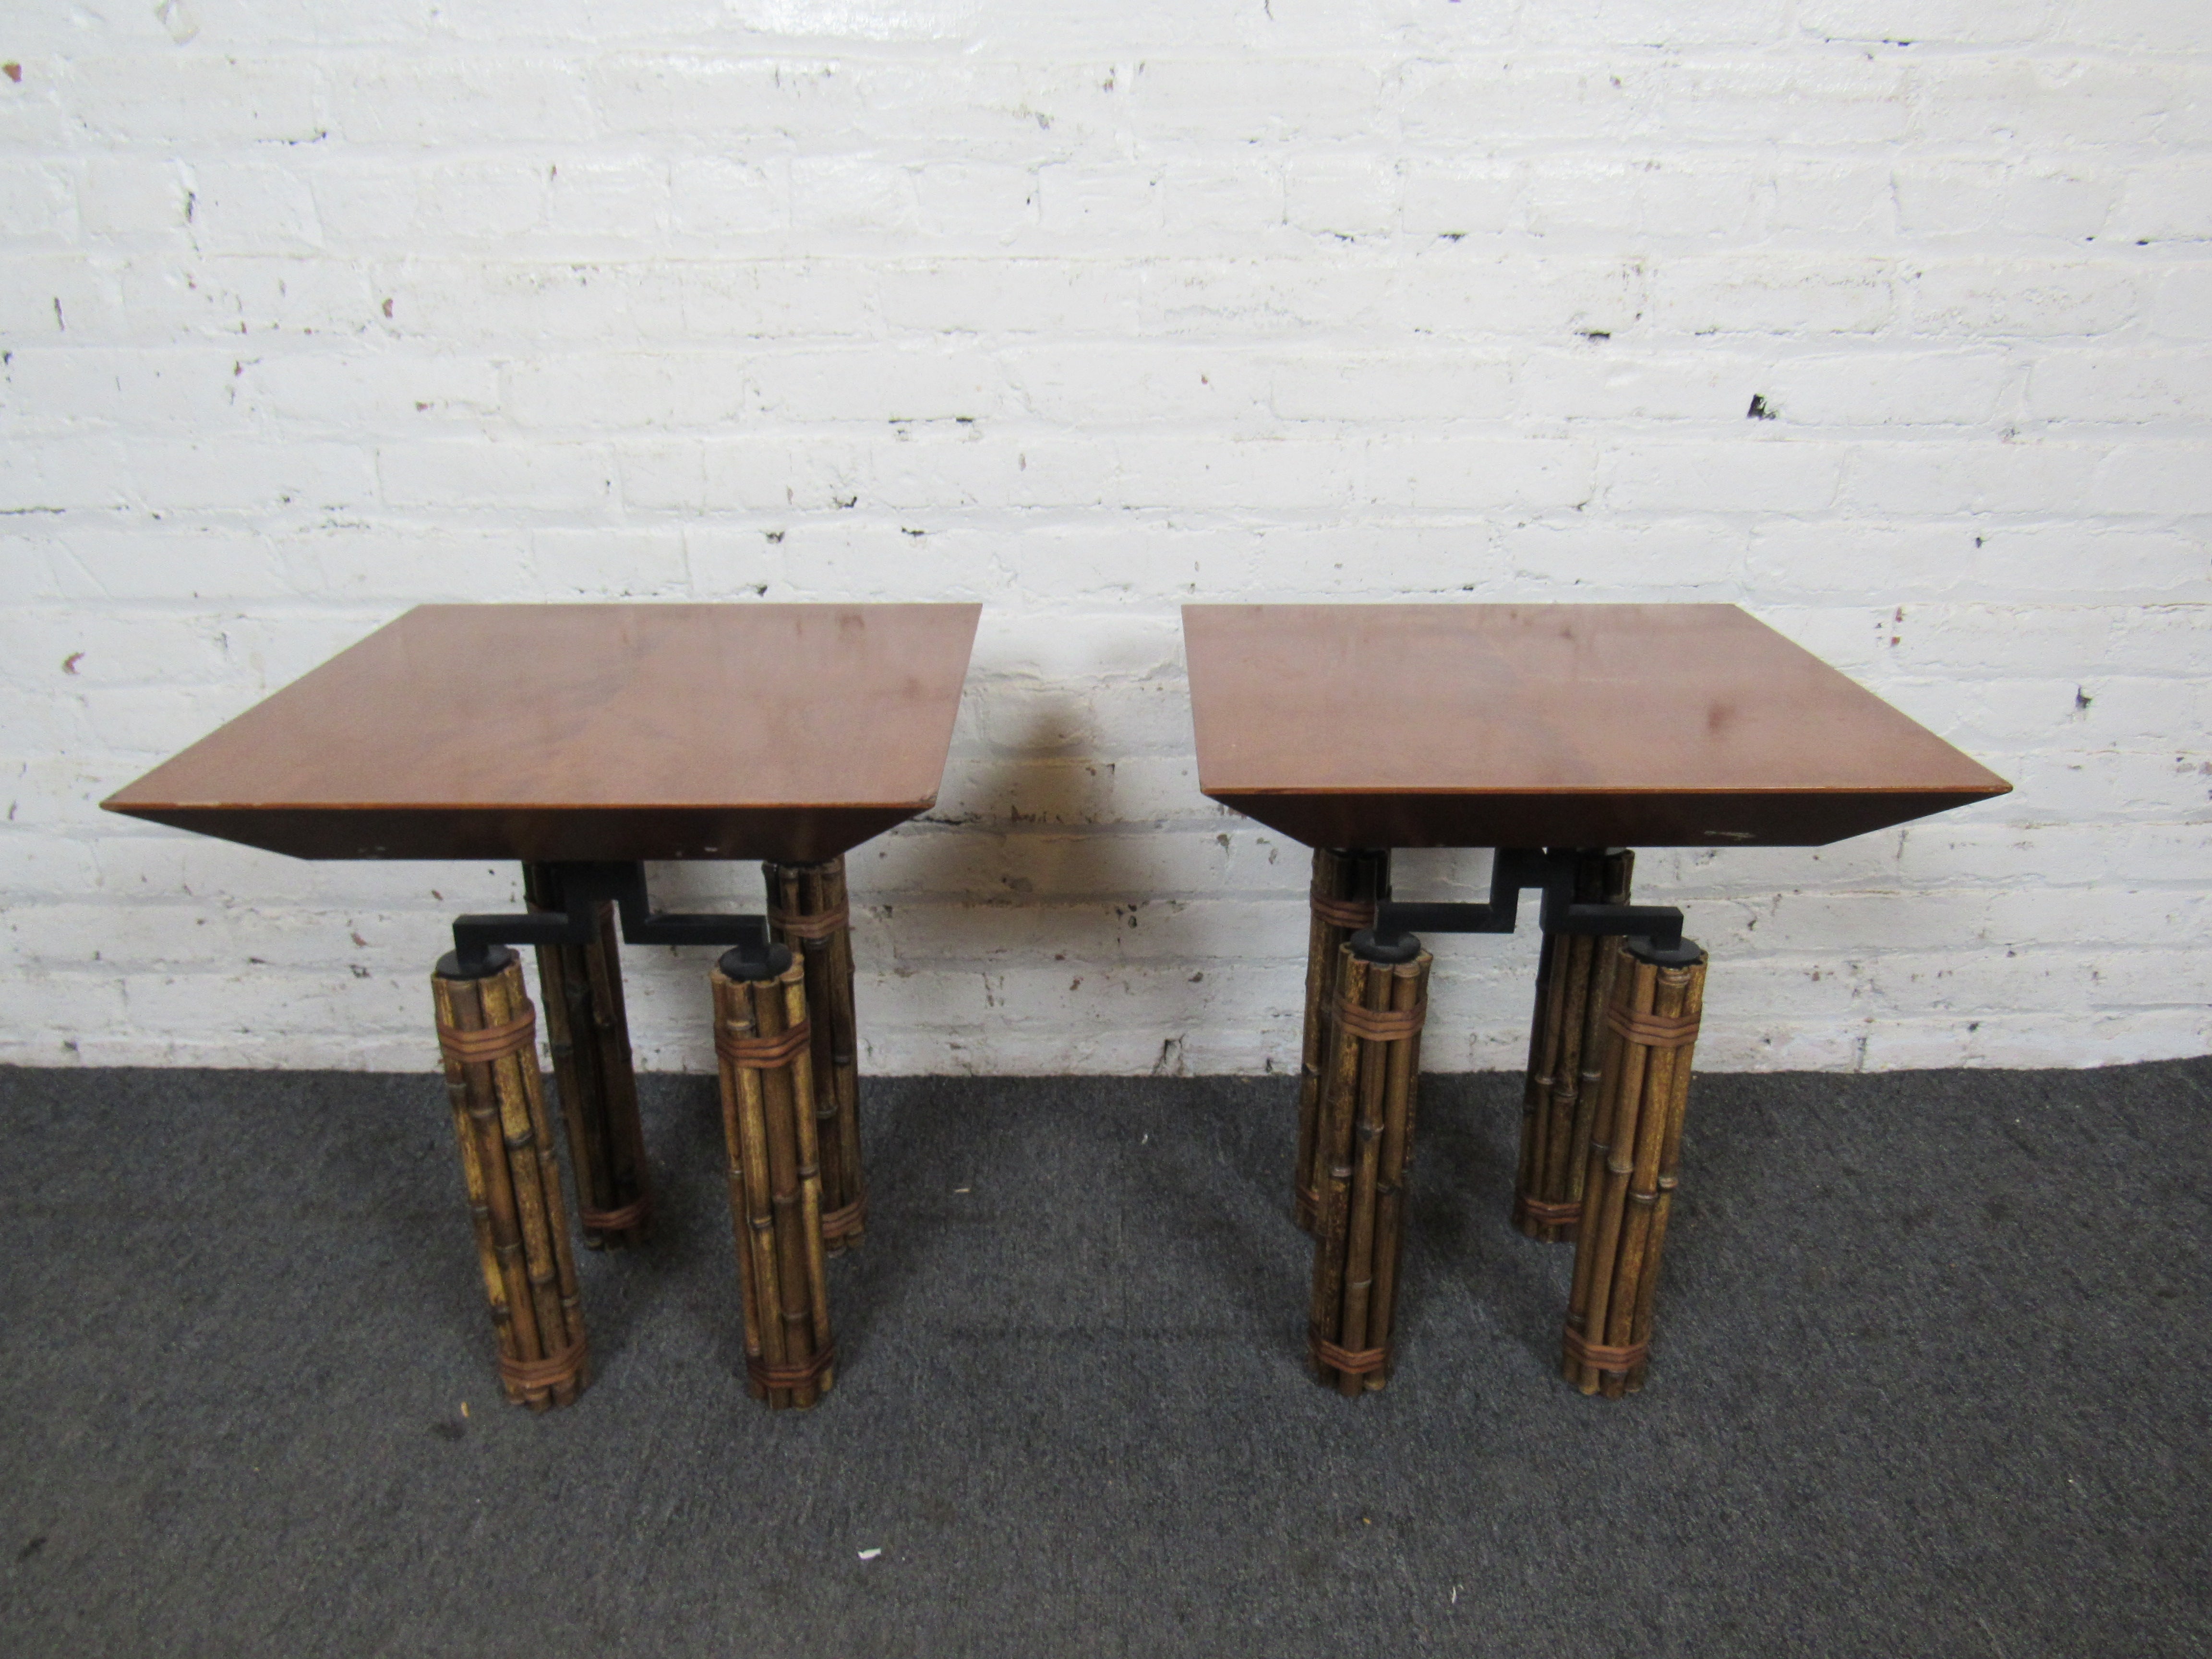 This pair of side tables by McGuire combines faux bamboo with metal, and square wooden tops for a unique look. The Huxley Series was designed by Richard Hannum.
Please confirm item location with seller (NY/NJ).